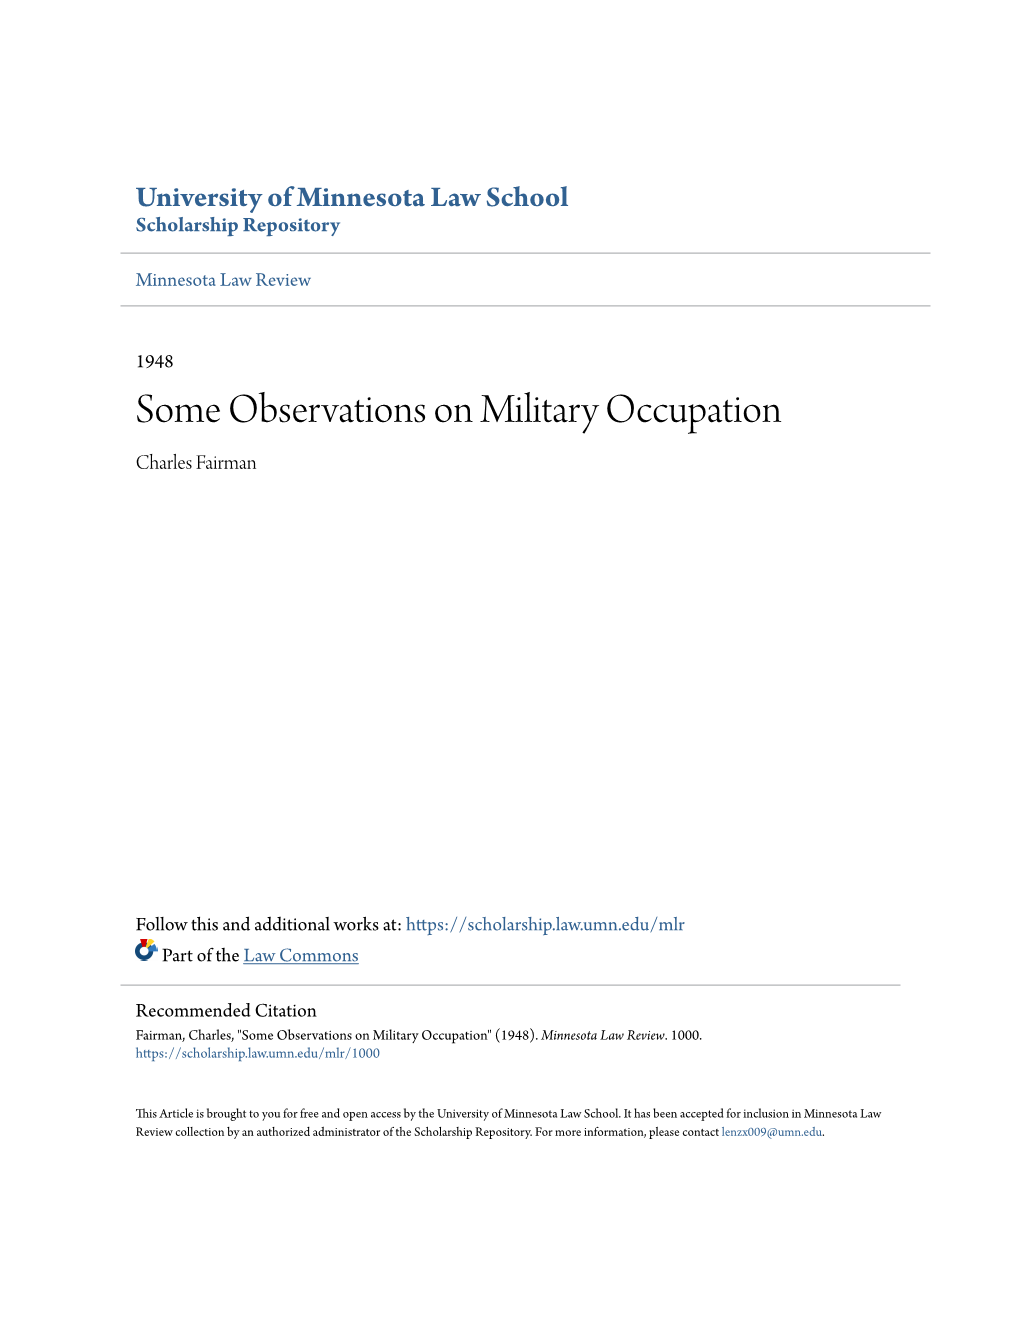 Some Observations on Military Occupation Charles Fairman